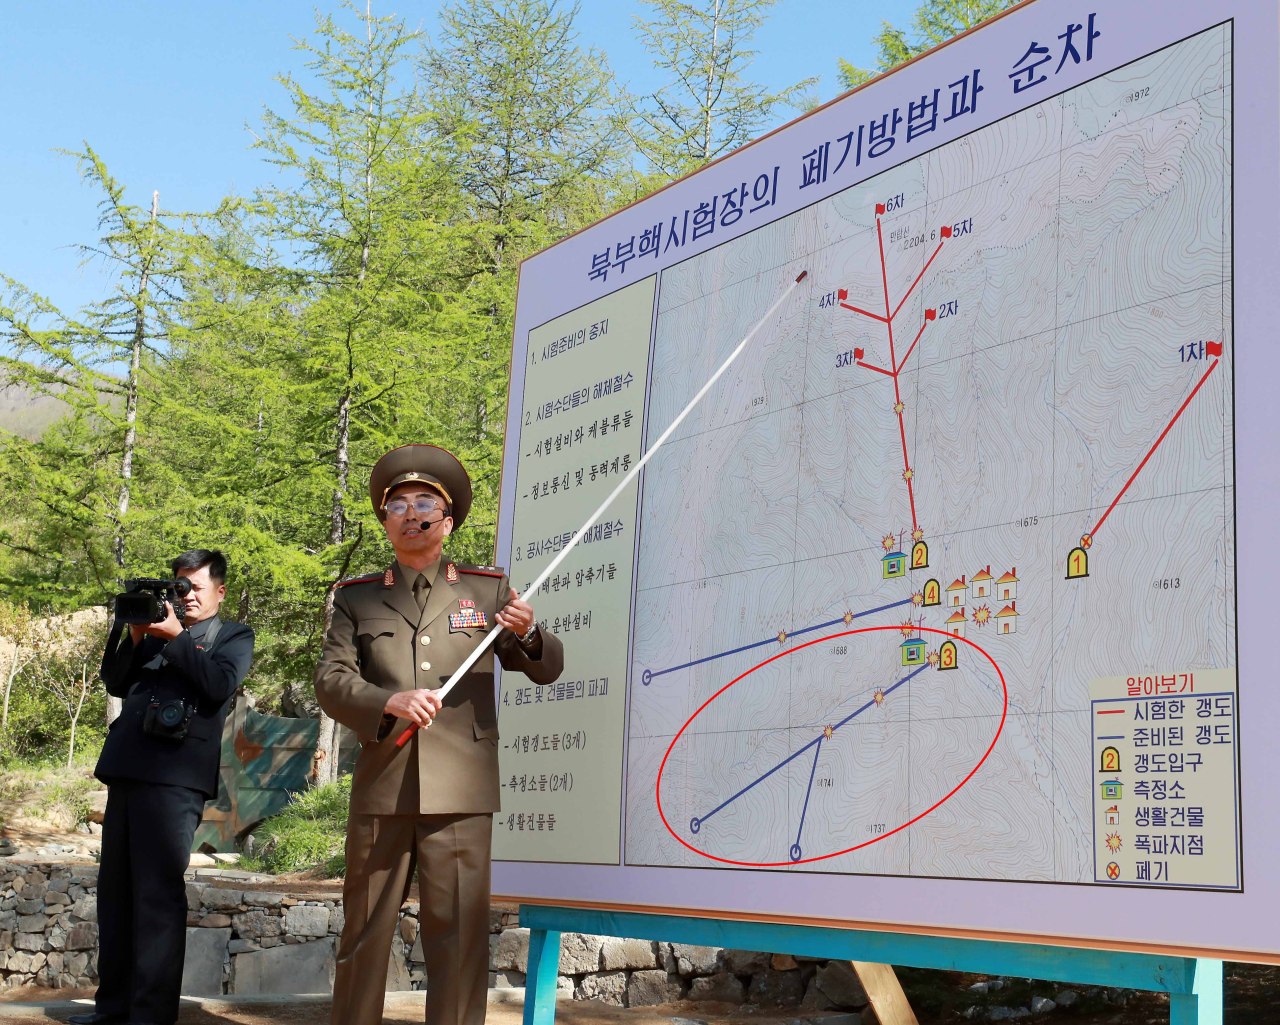 Satellite imagery shows ‘visible’ signs of North Korea reactivating nuclear test site